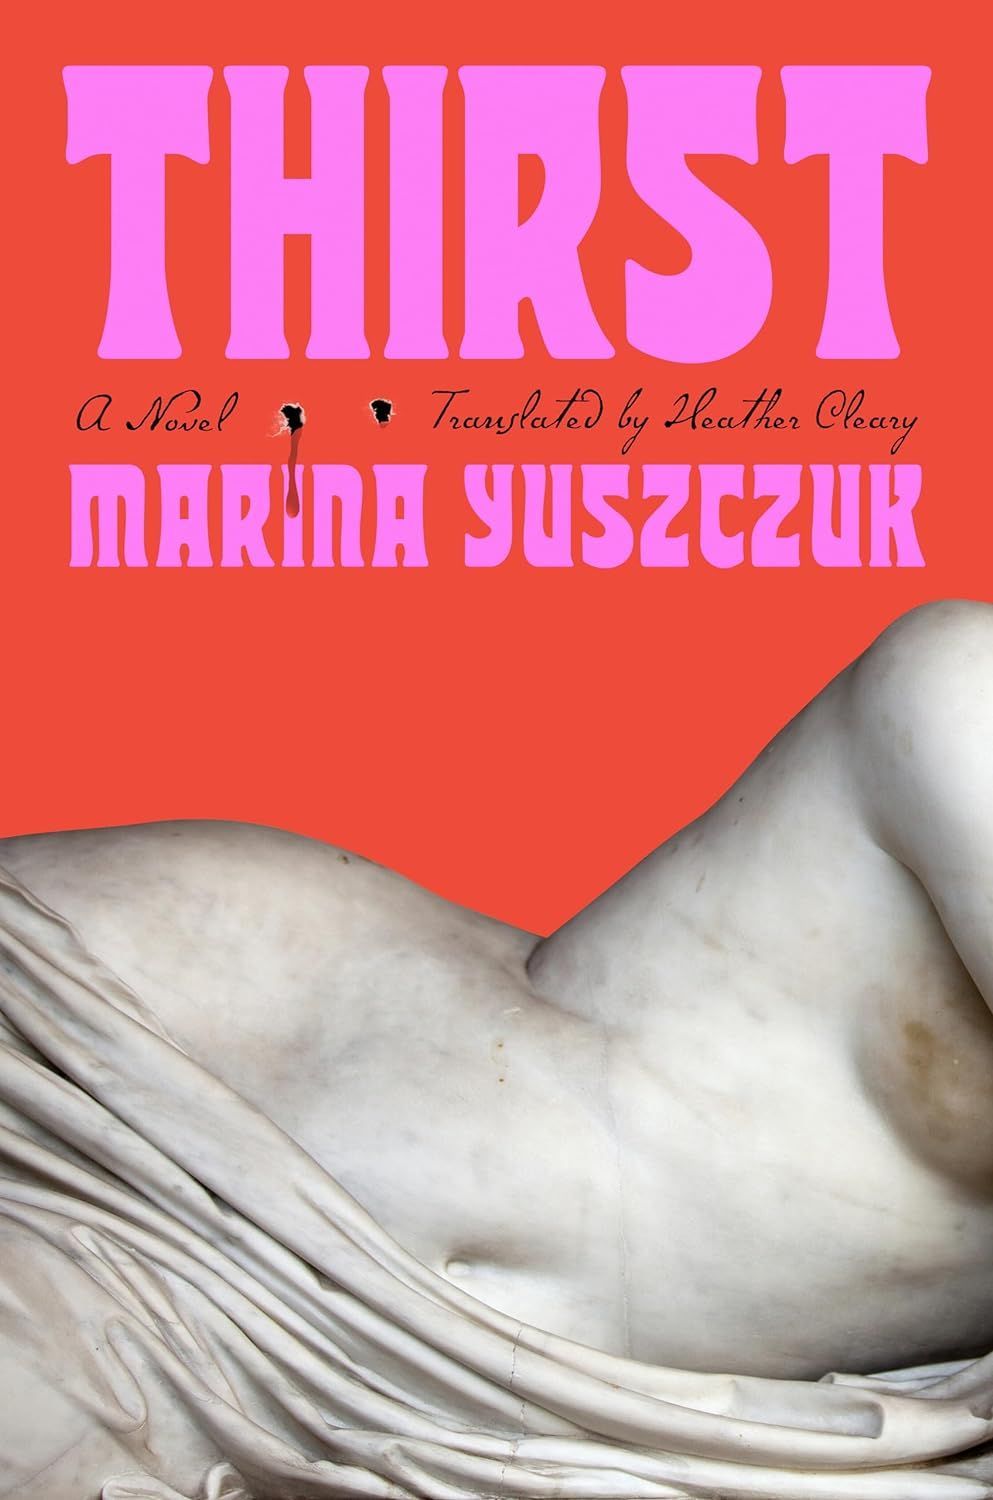 In the Midst of Life, We Are in Death: On Marina Yuszczuk’s “Thirst”